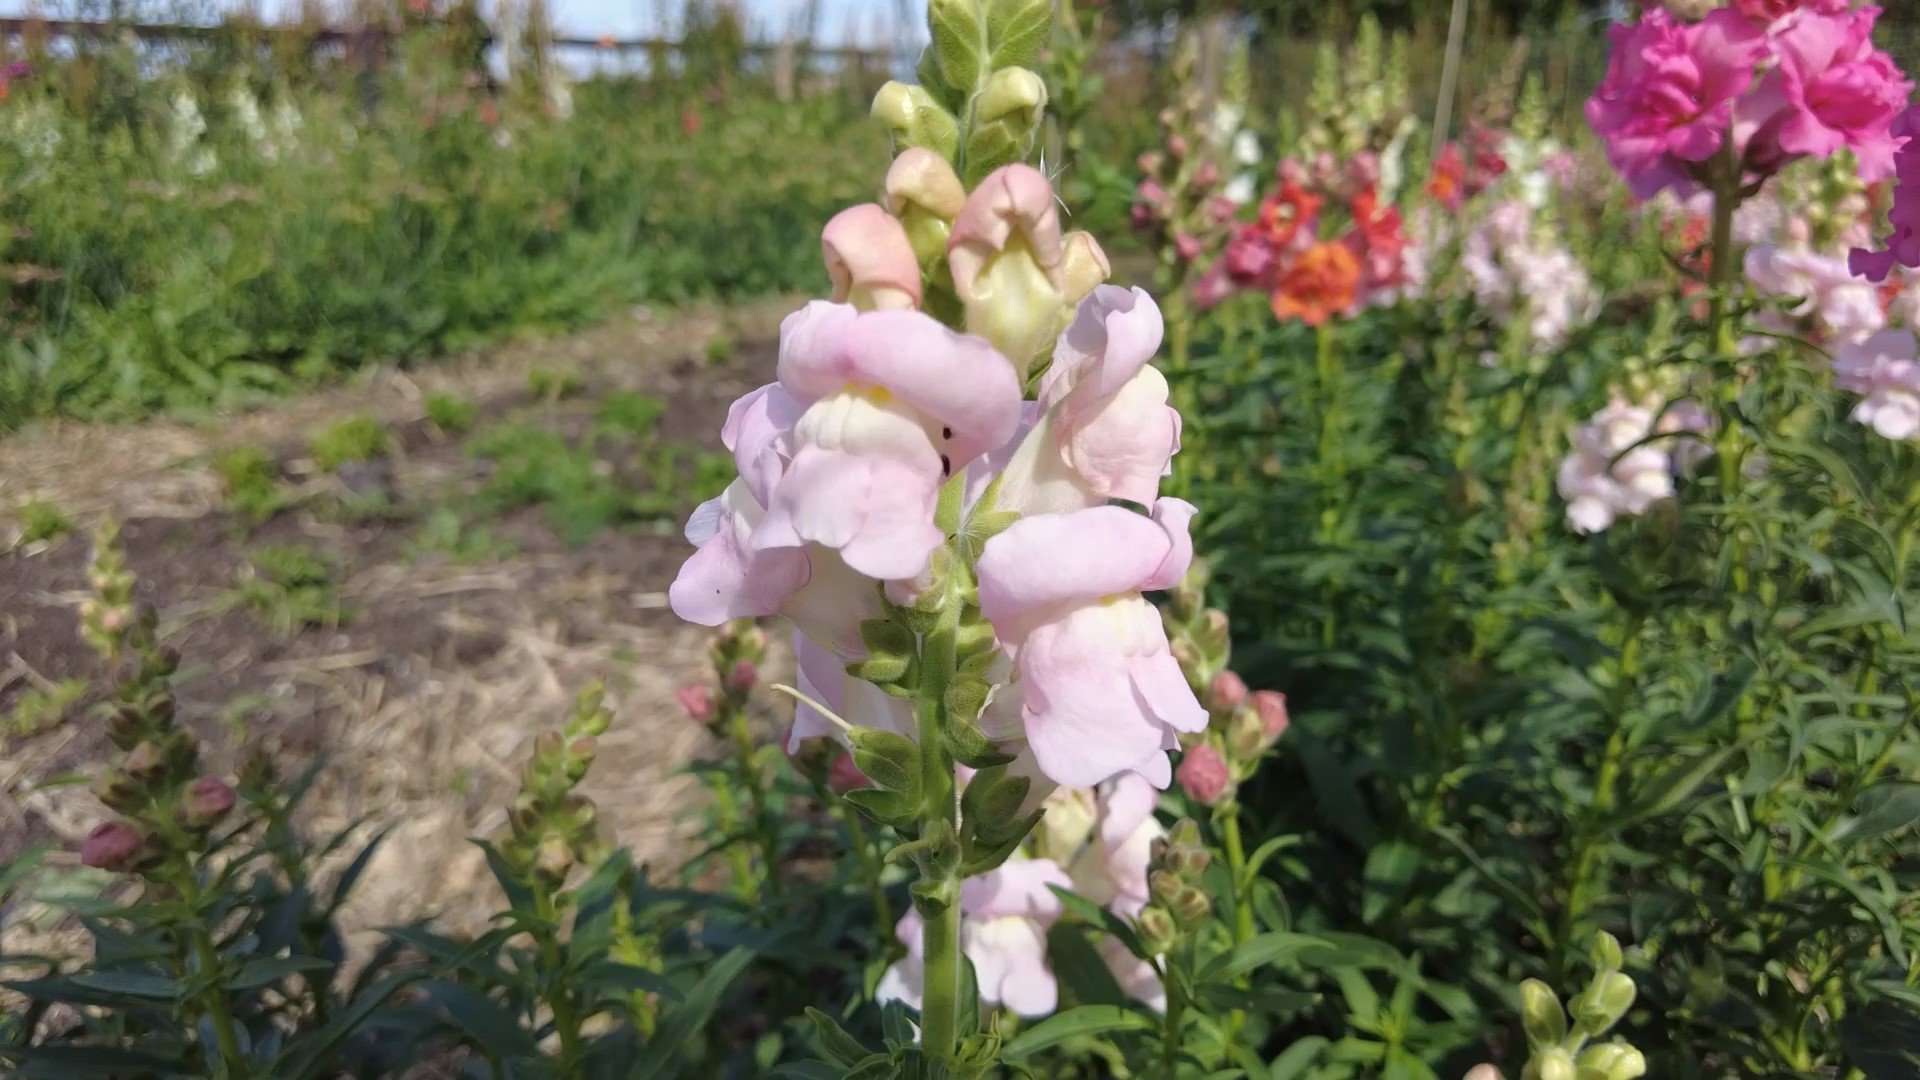 how to grow snapdragons - frame at 4m46s.jpg